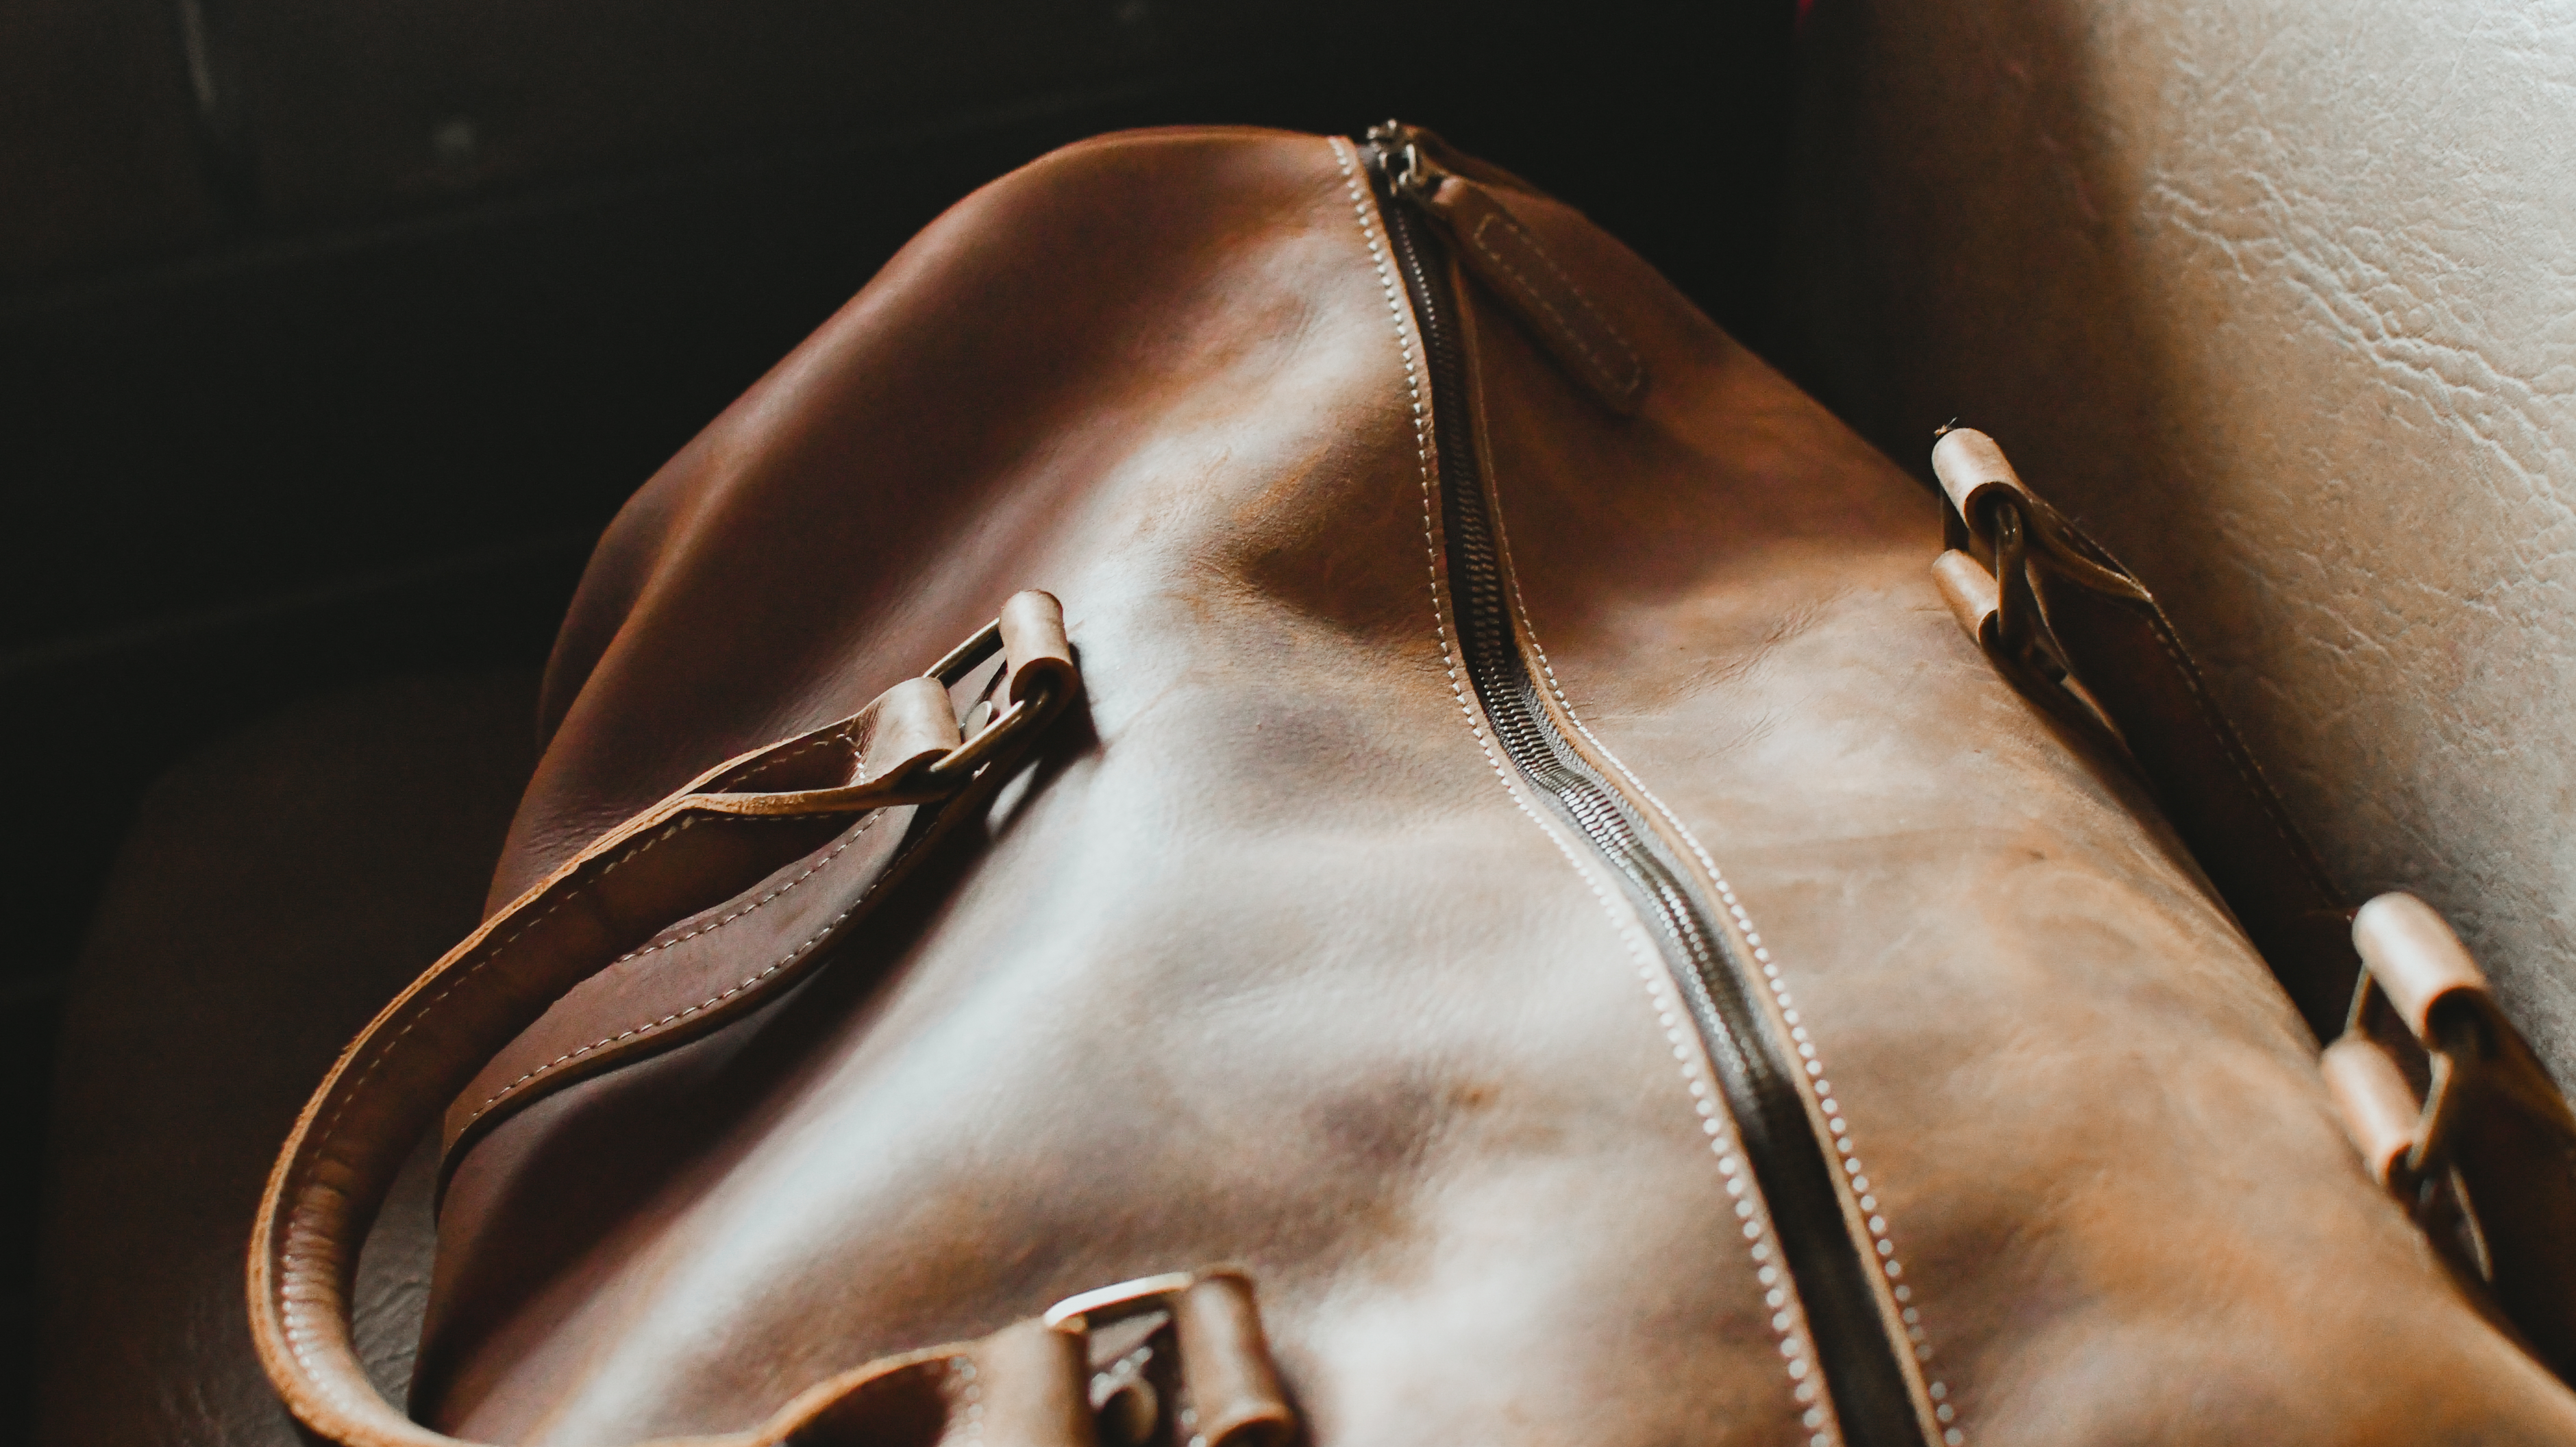 Leather Duffle Bag - Guide to Choosing a Classic You'll Love